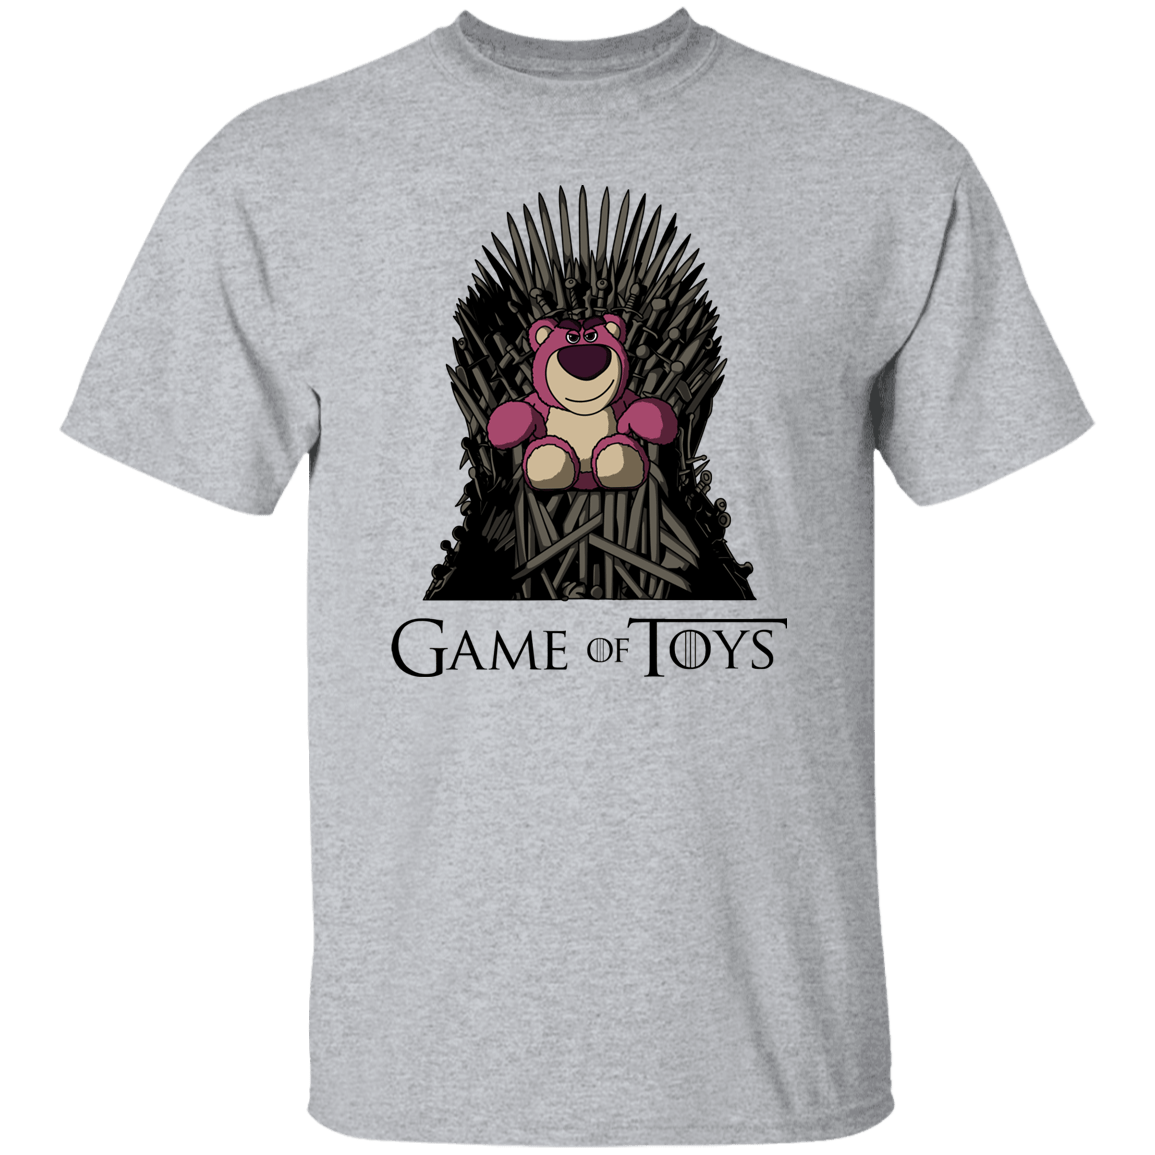 T-Shirts Sport Grey / S Game Of Toys T-Shirt